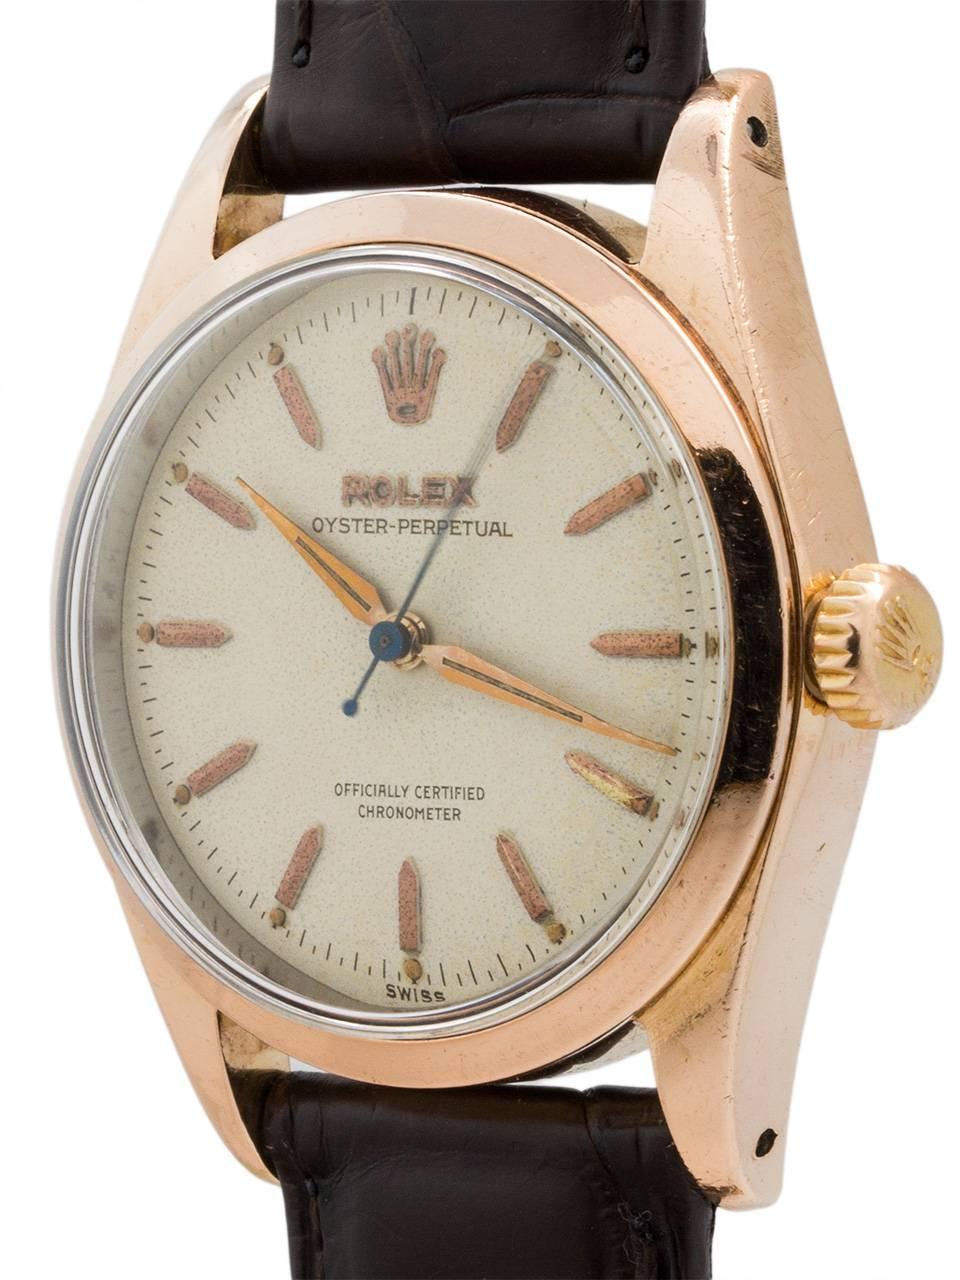 Vintage man’s Rolex ref 6334 Oyster Perpetual rose gold shell, stainless steel case back circa 1954. Featuring 34mm diameter case with smooth bezel, acrylic crystal, and very pleasing original antique white dial with applied rose gold feted baton